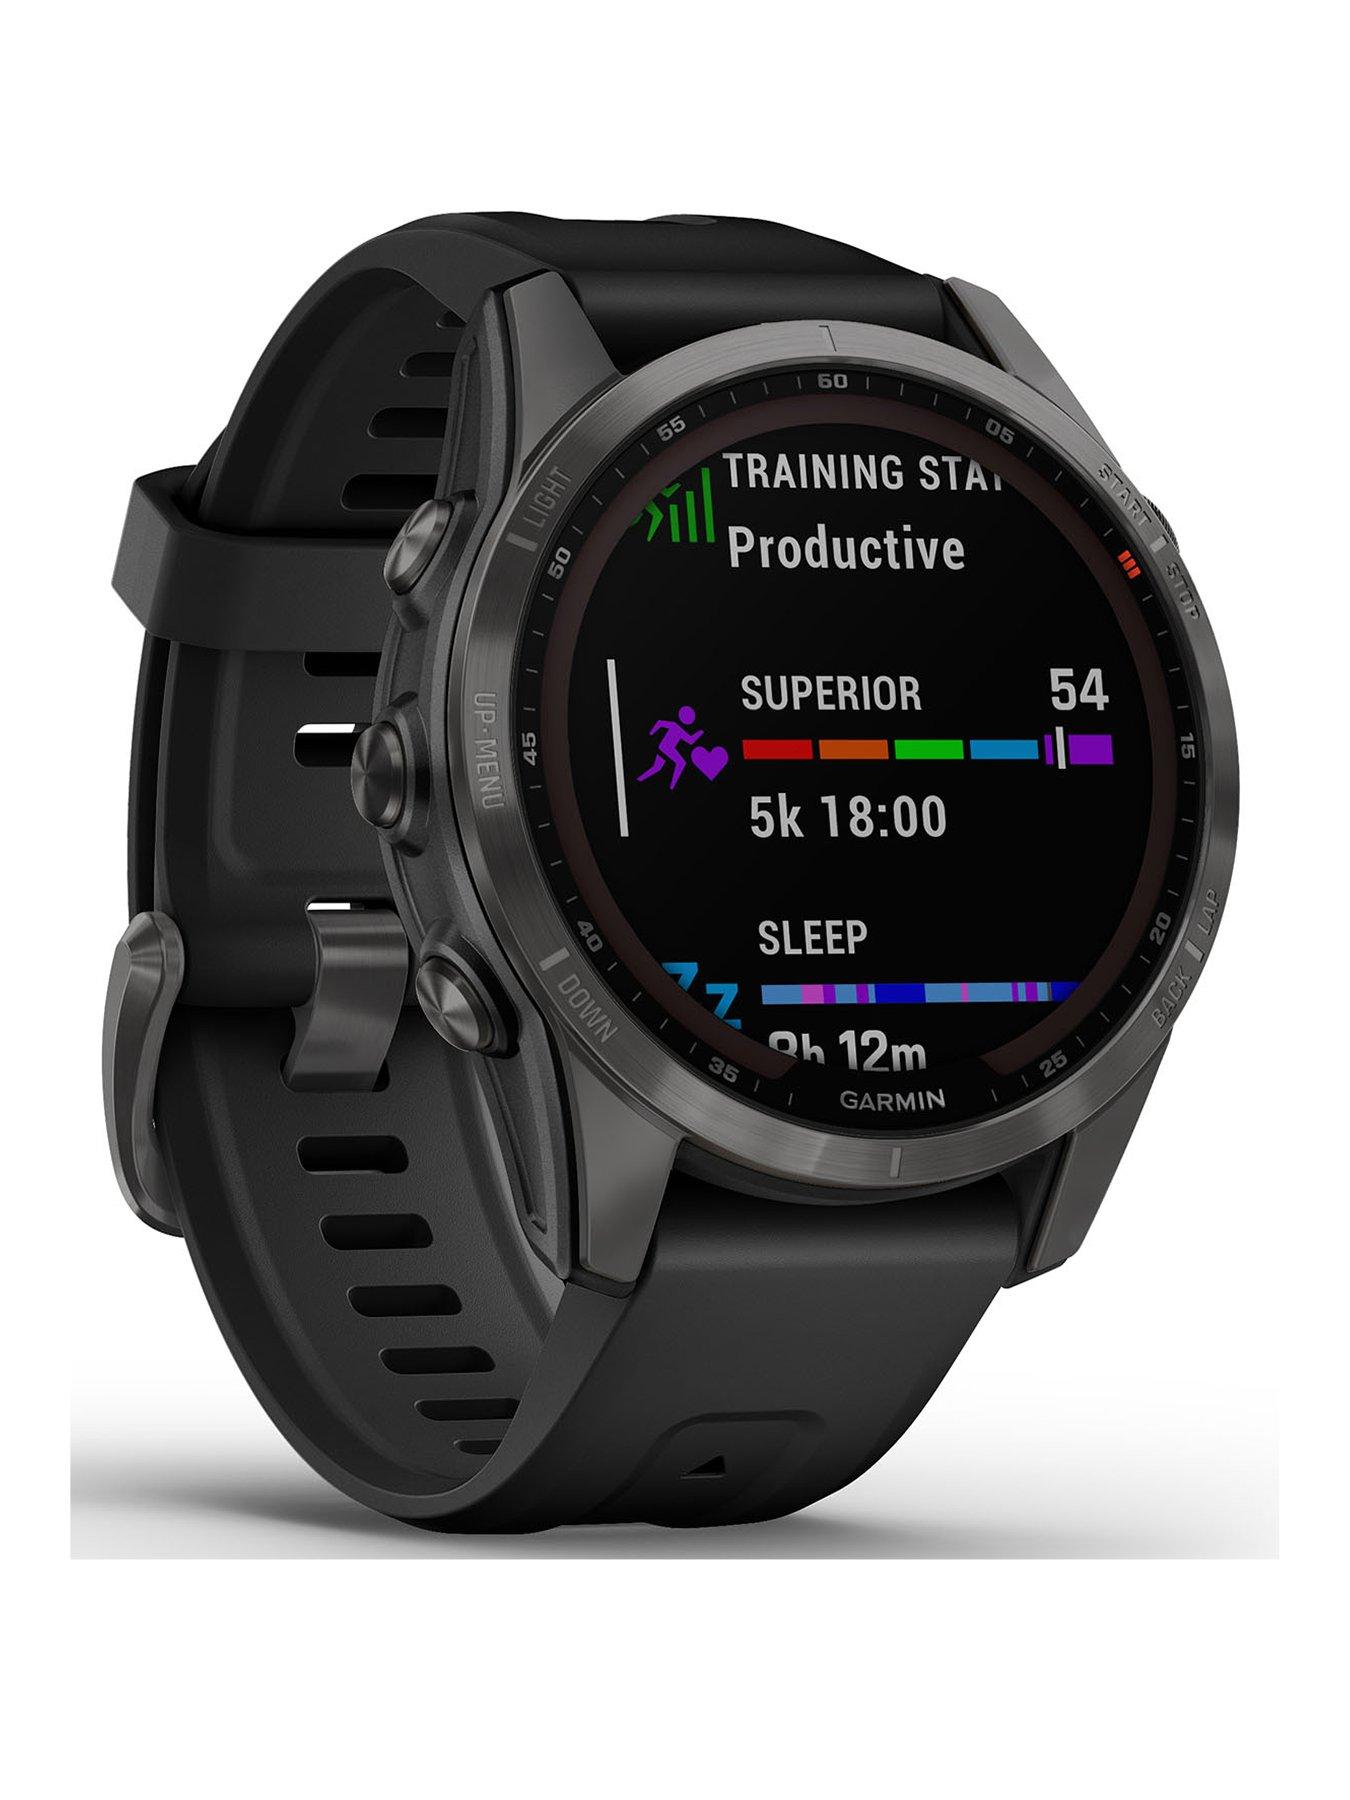  Garmin Forerunner 255 (Slate Gray) GPS Running Smartwatch, Runner's Bundle with HD Screen Protectors & Portable Charger